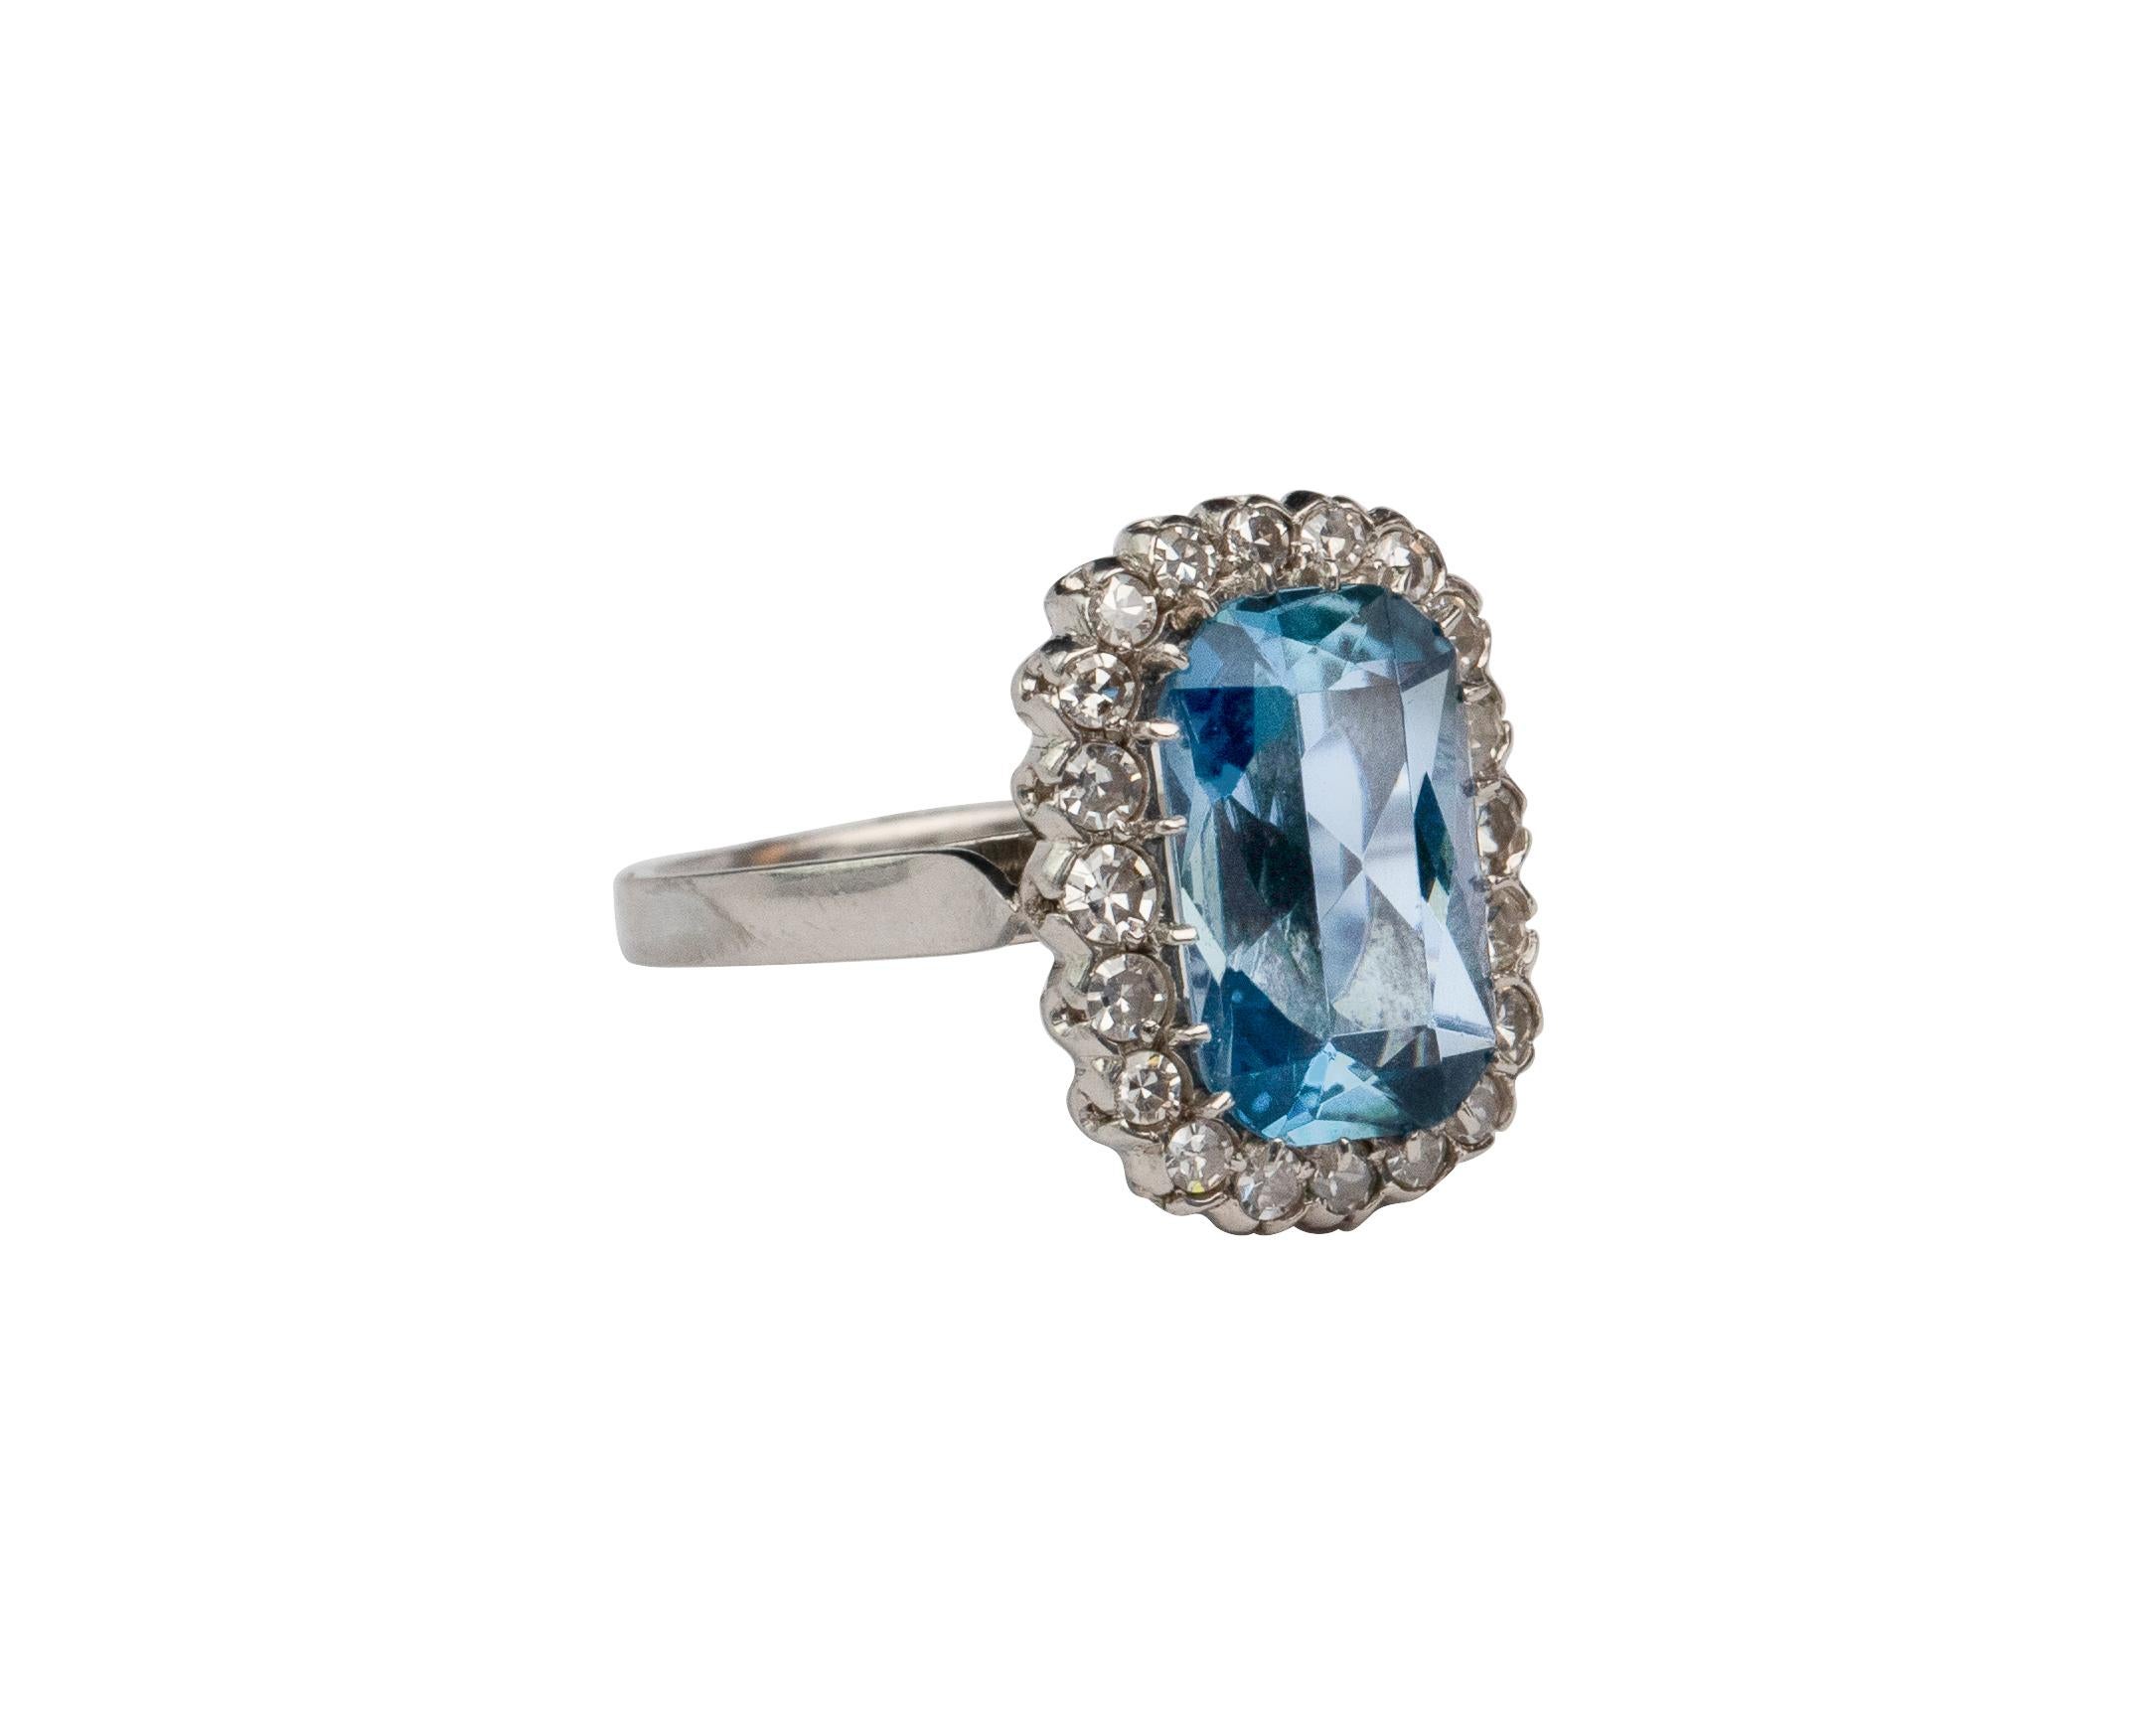 This is a gorgeous example of a vintage aquamarine ring! The top quality 